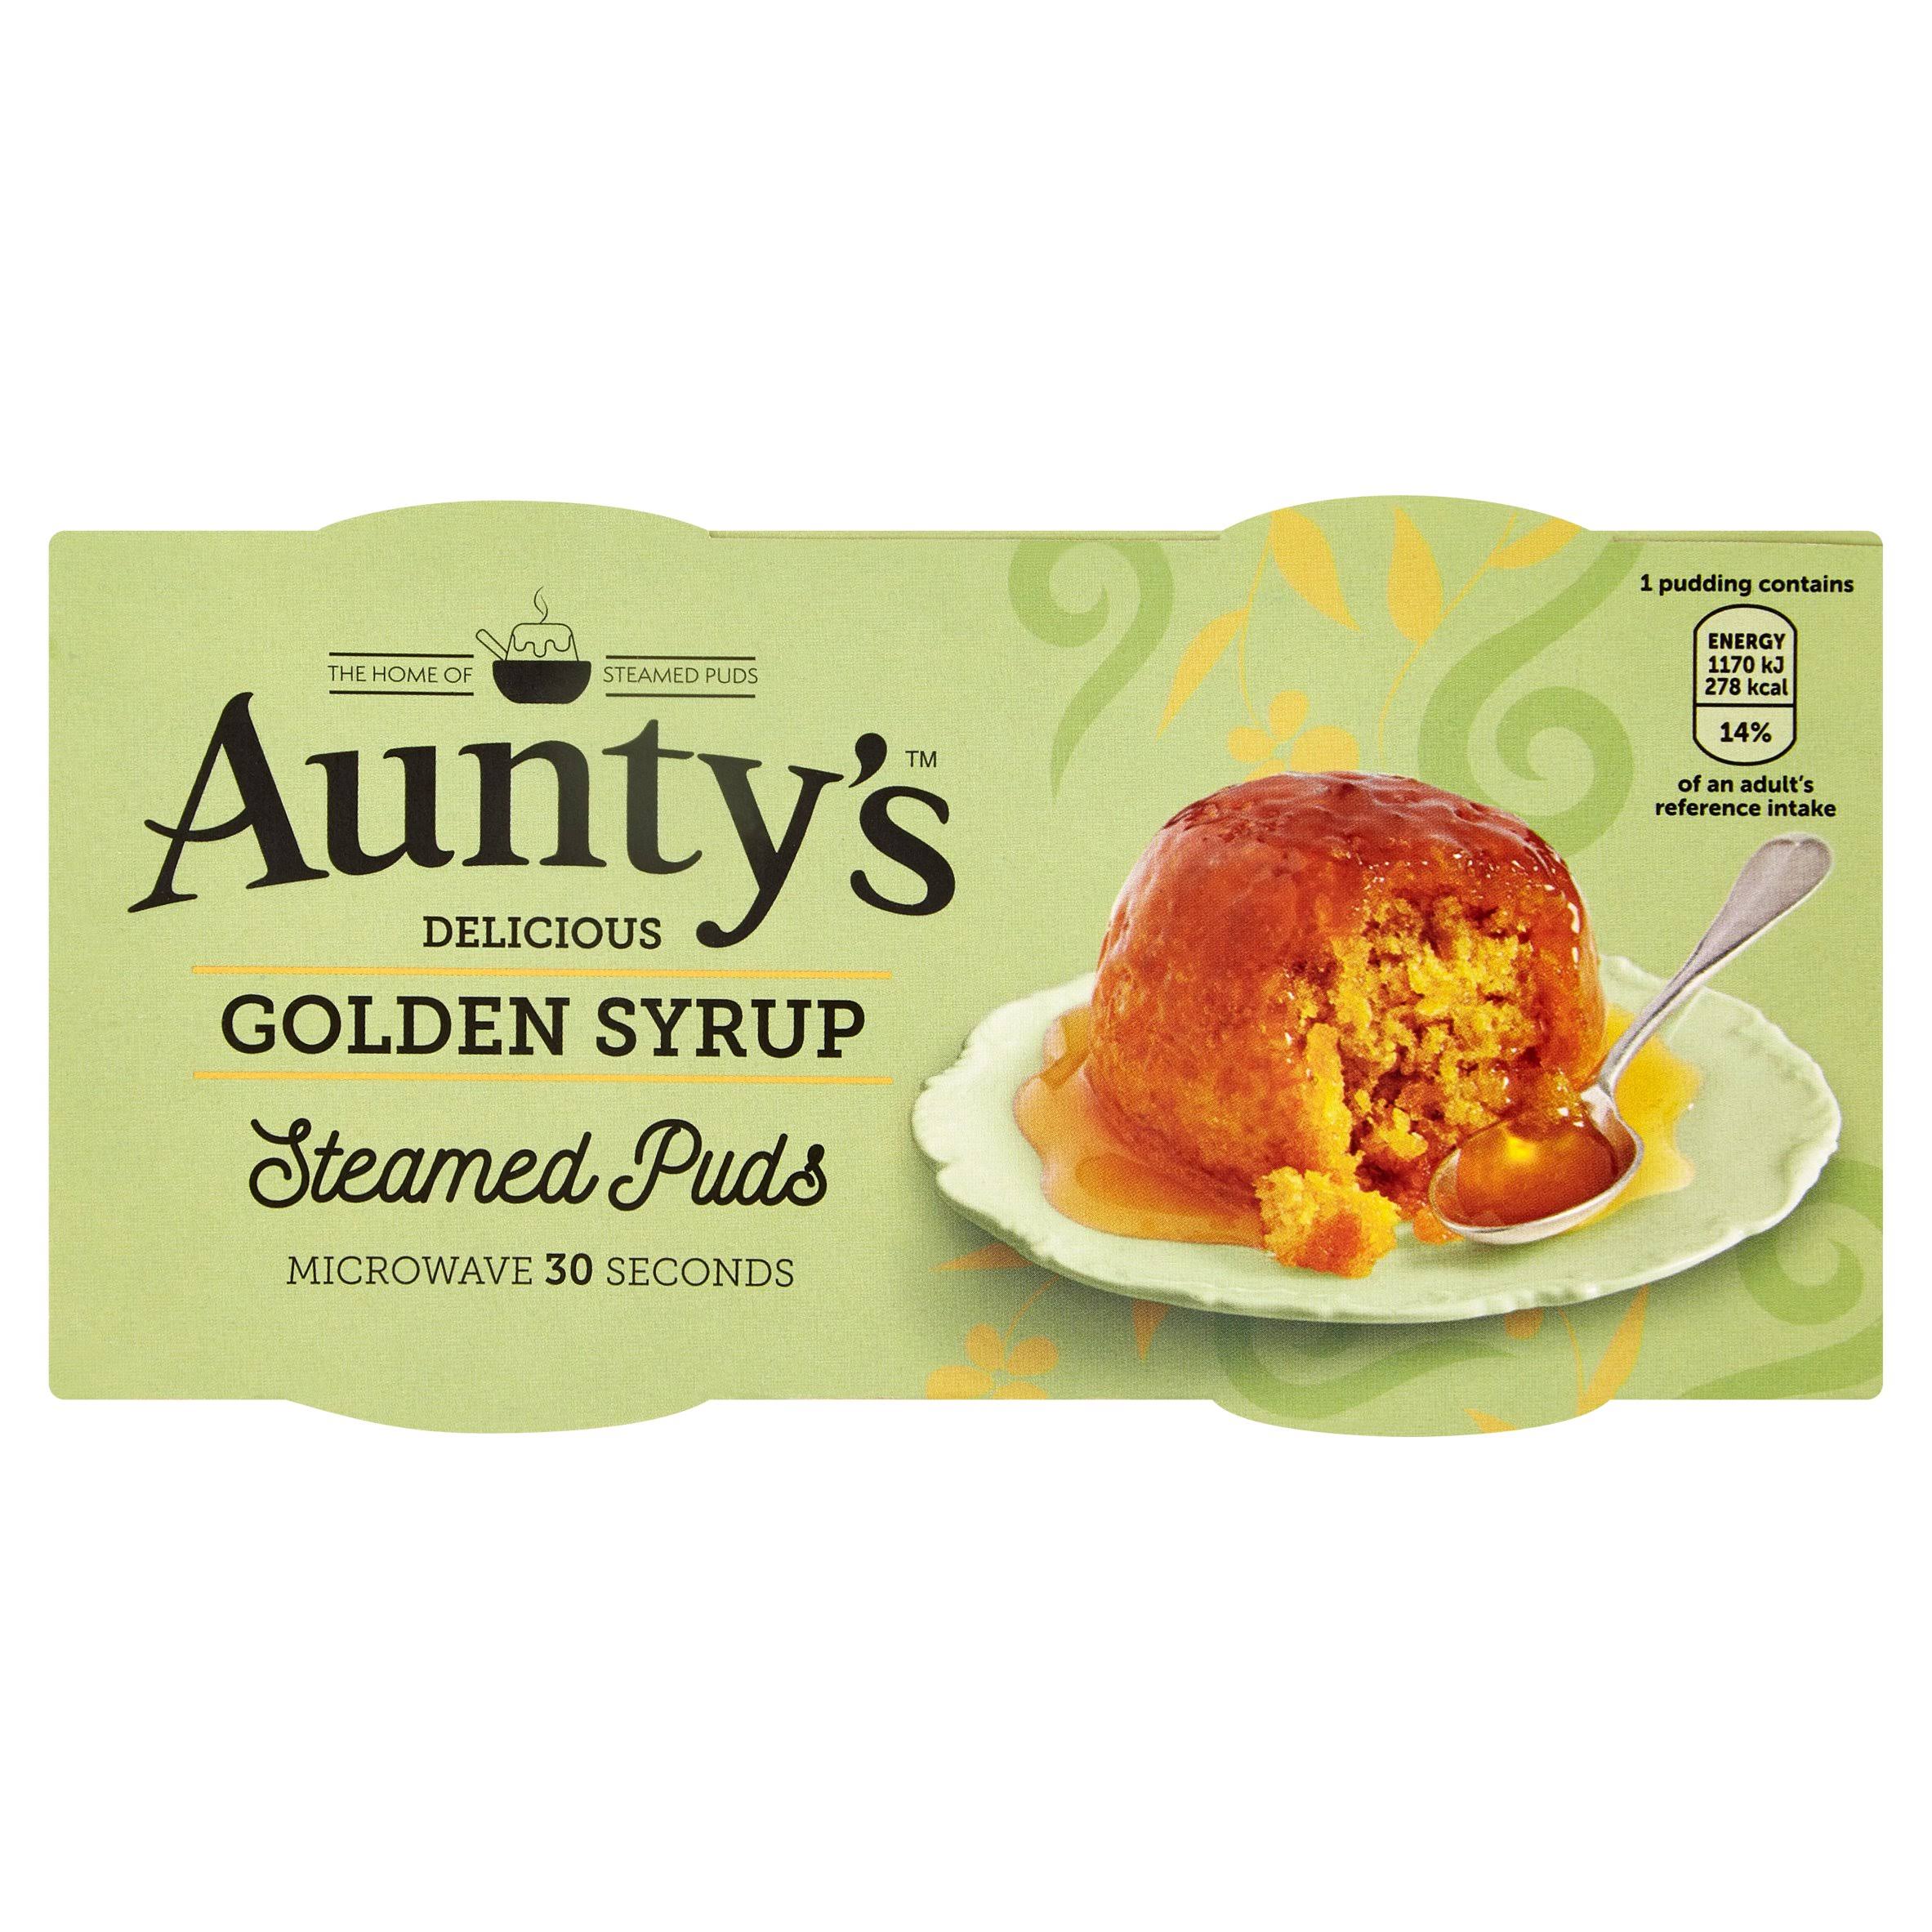 Aunty's Delicious Golden Syrup Steamed Puds - 2 x 95g